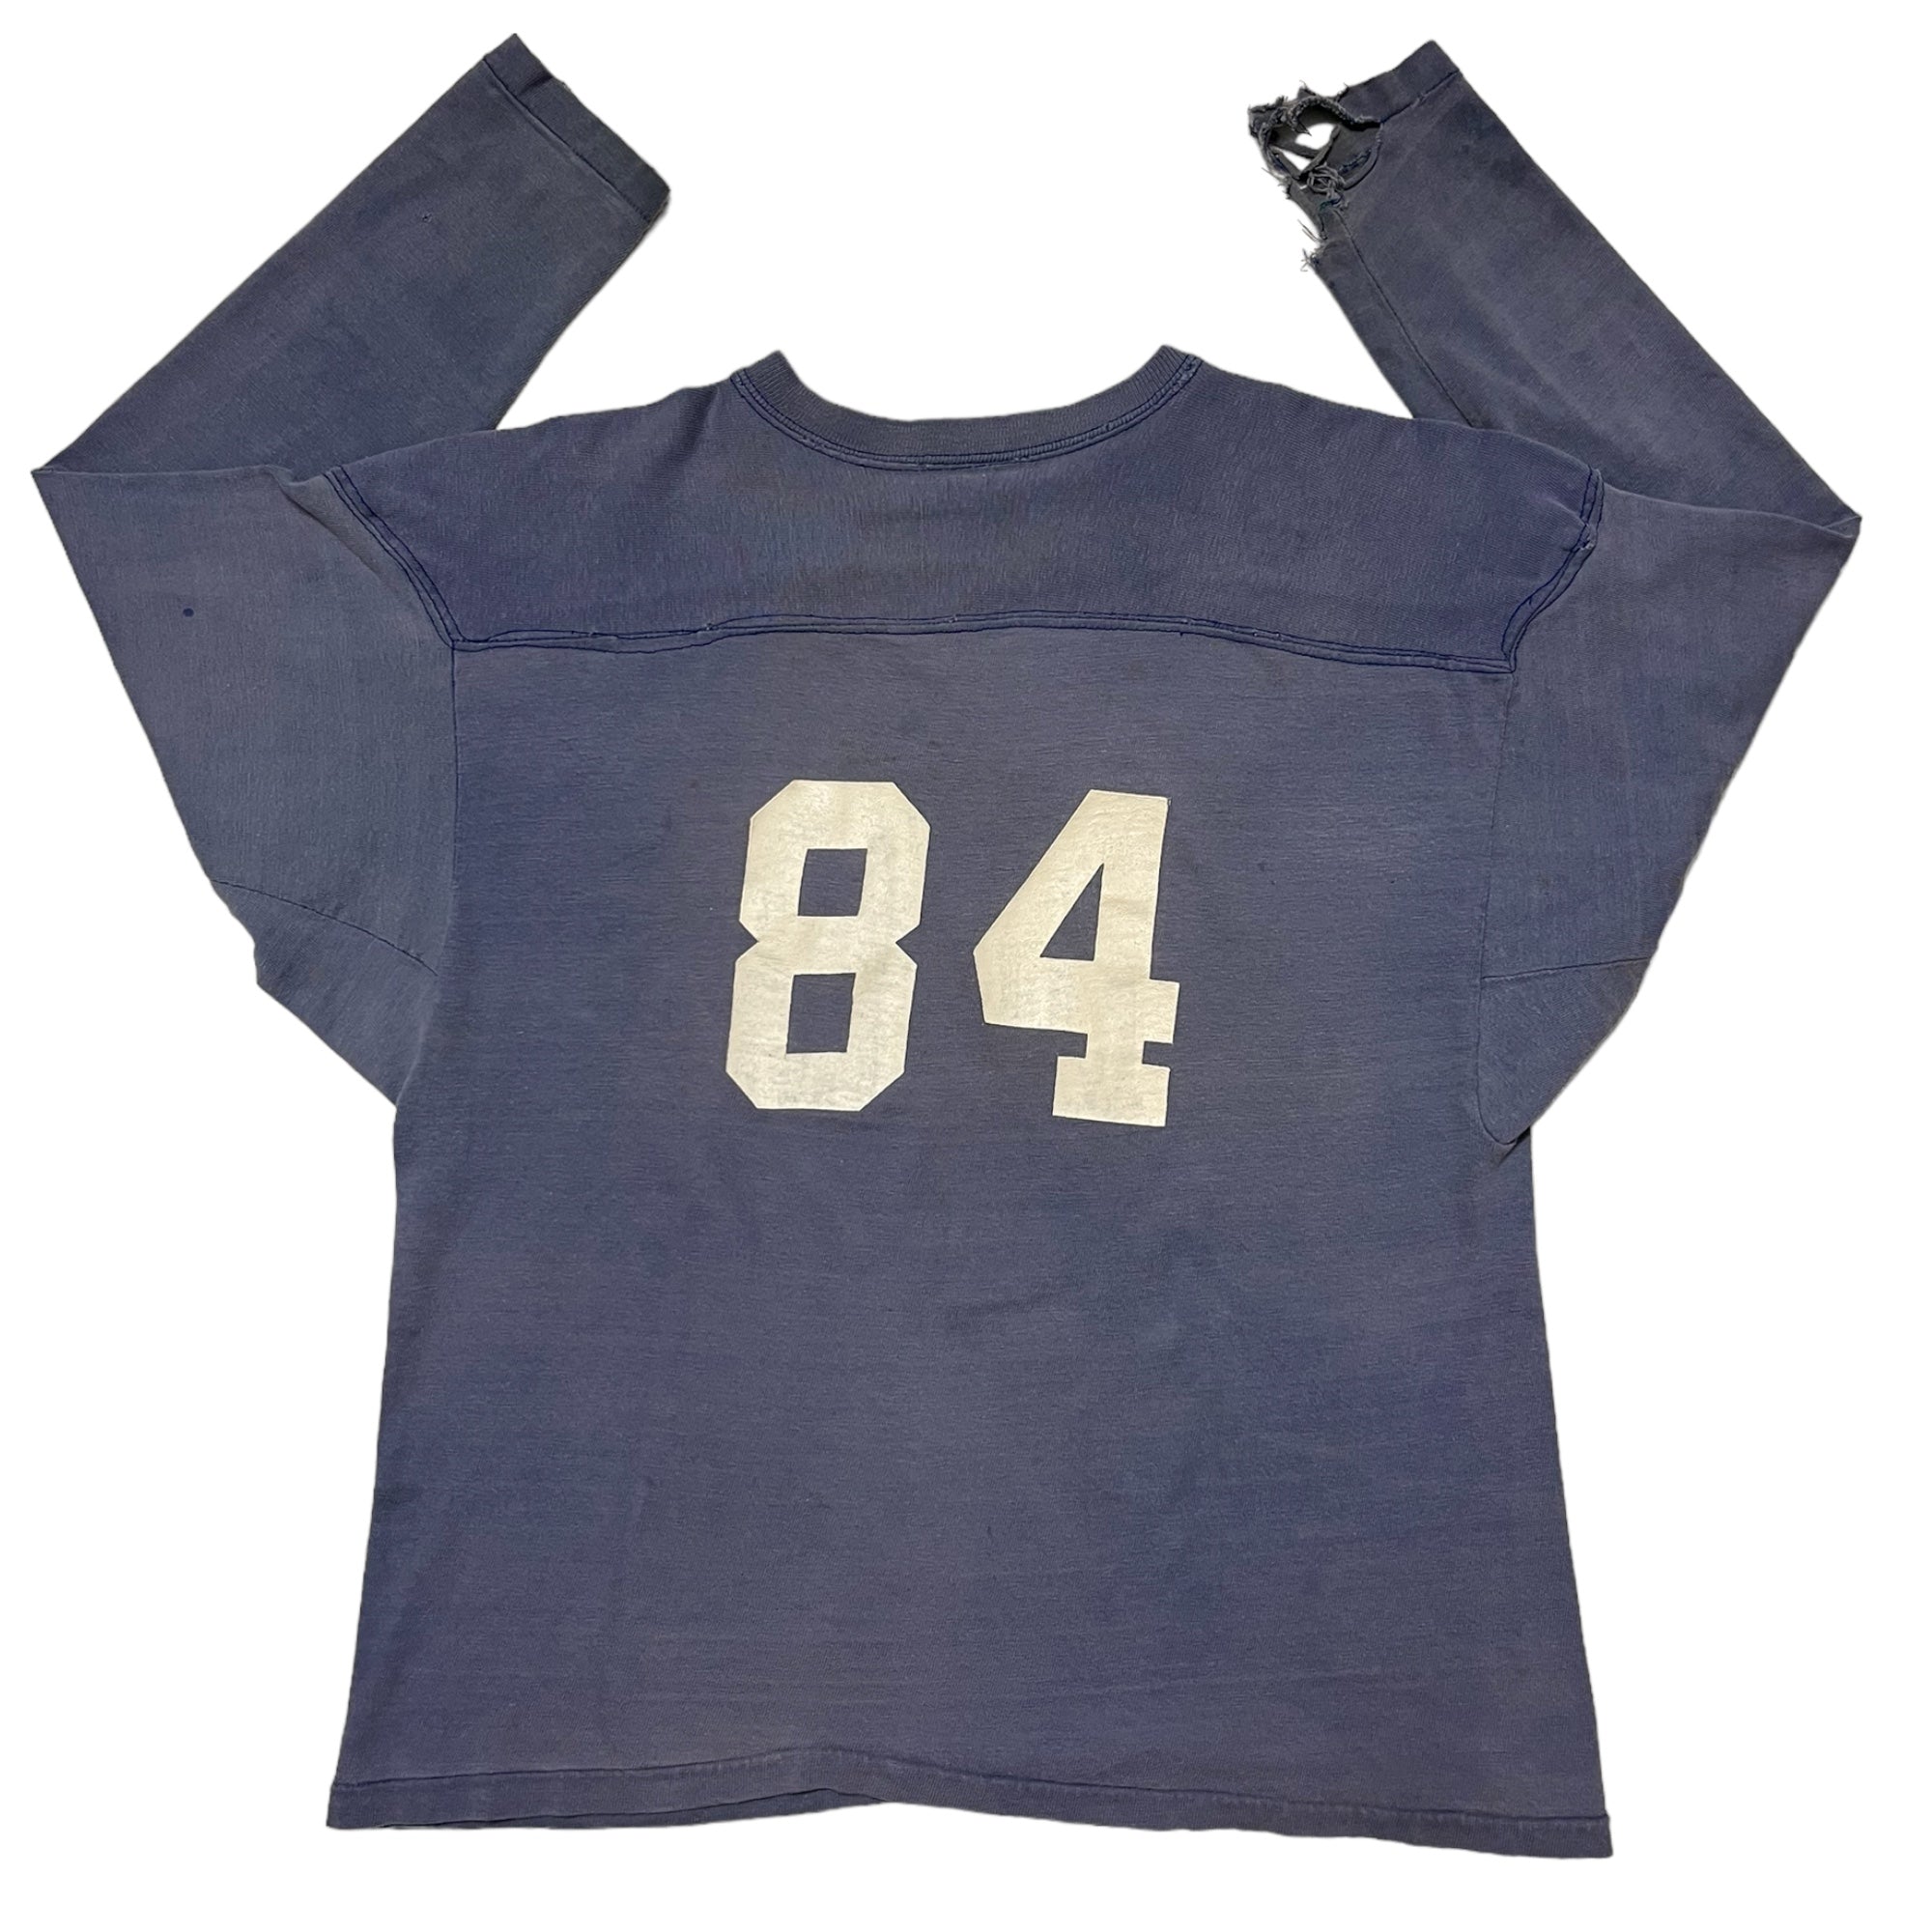 1960s Mighty Mites Distressed Football Jersey - Faded Cornflower Blue - XS/S